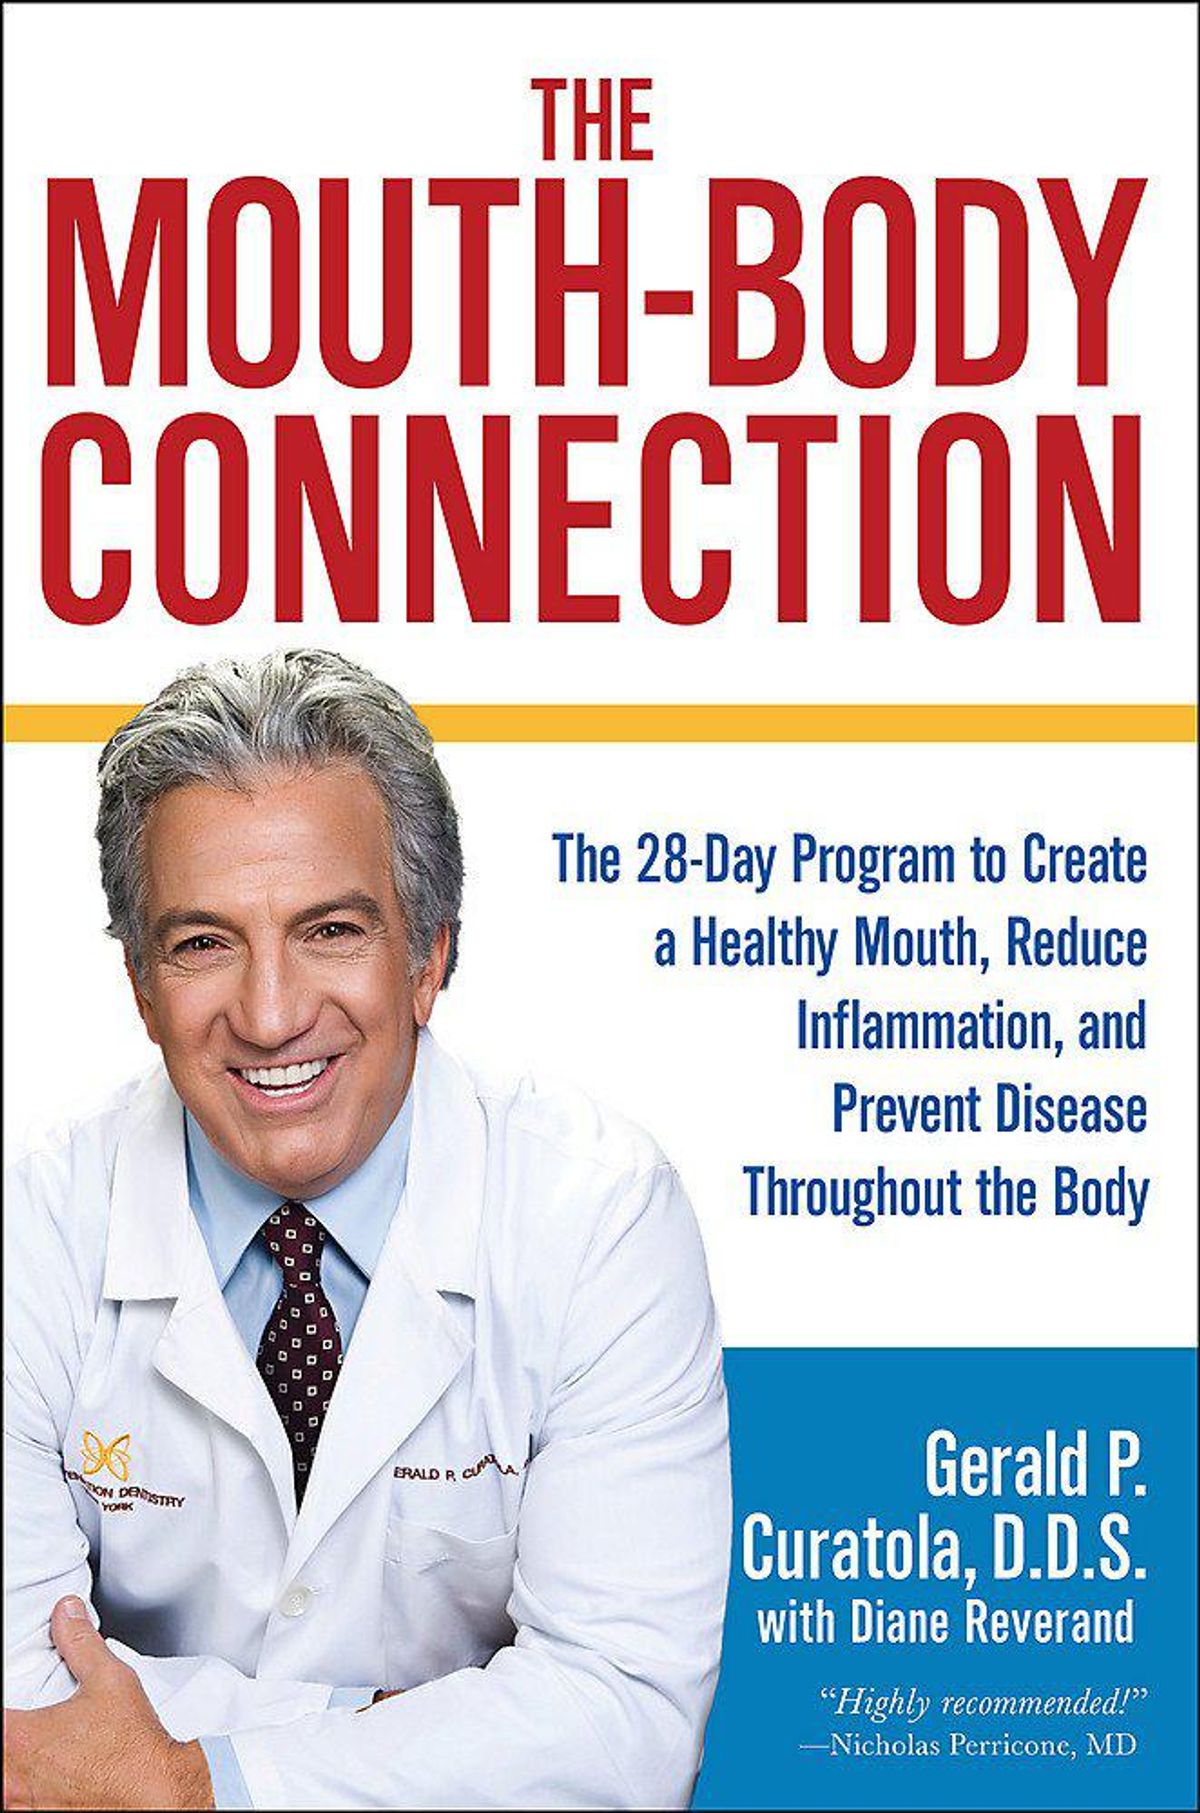 gerald p curatola dds diane reverand the mouth body connection the 28 day program to create a healthy mouth reduce inflammation and prevent disease throughout the body